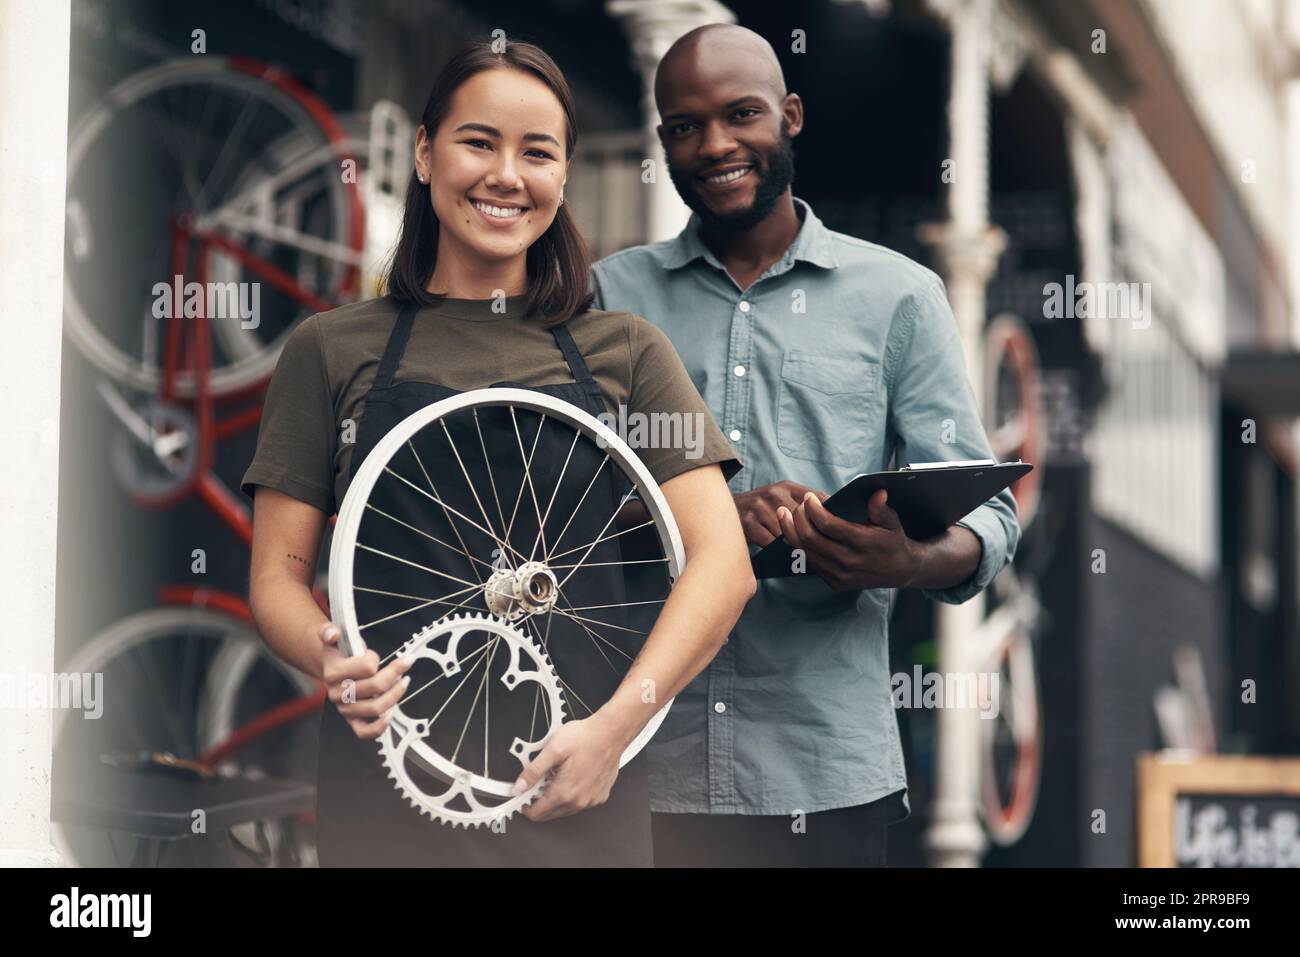 Weve got all the spare parts inside. two young business owners standing outside their bicycle shop during the day. Stock Photo